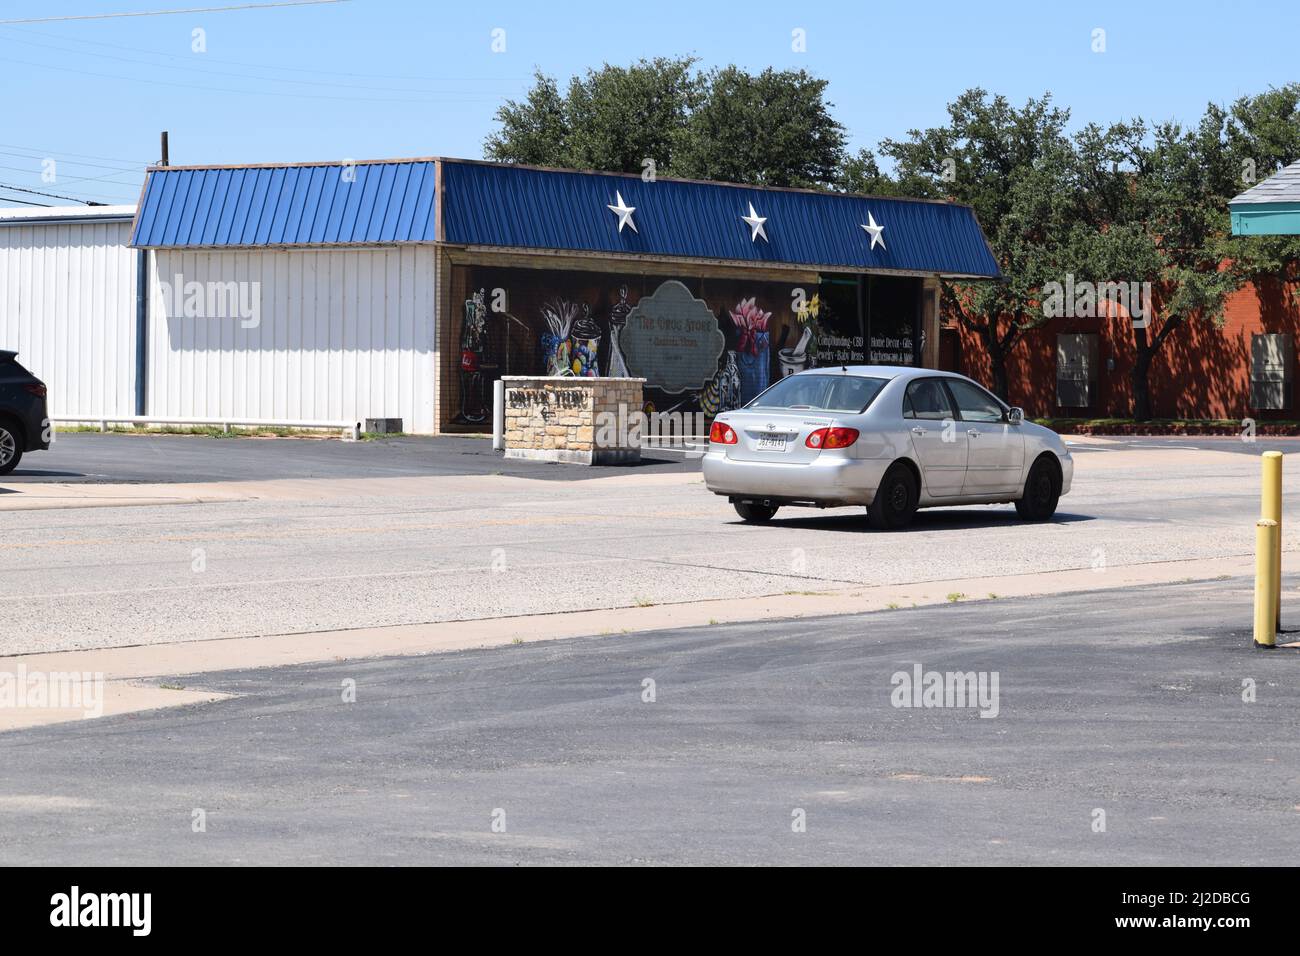 Silver 2004 Toyota Corolla driving down a street in Haskell Texas - August 2021 Stock Photo